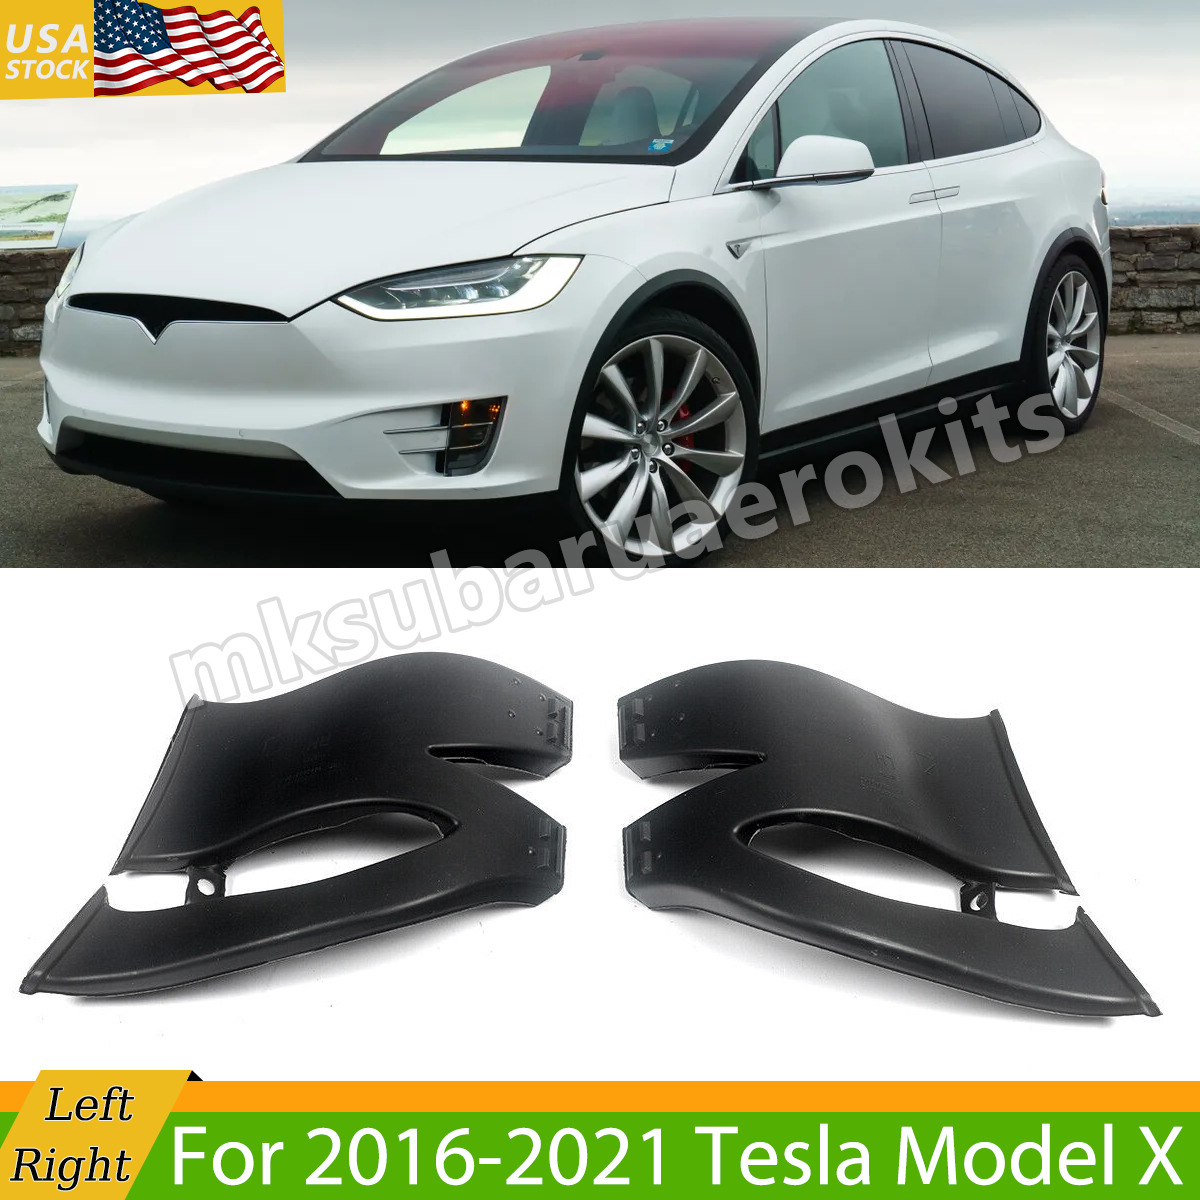 Left Right Air Intake Guide Duct Vent For 2016-2021 Tesla Model X 1043927-00-E